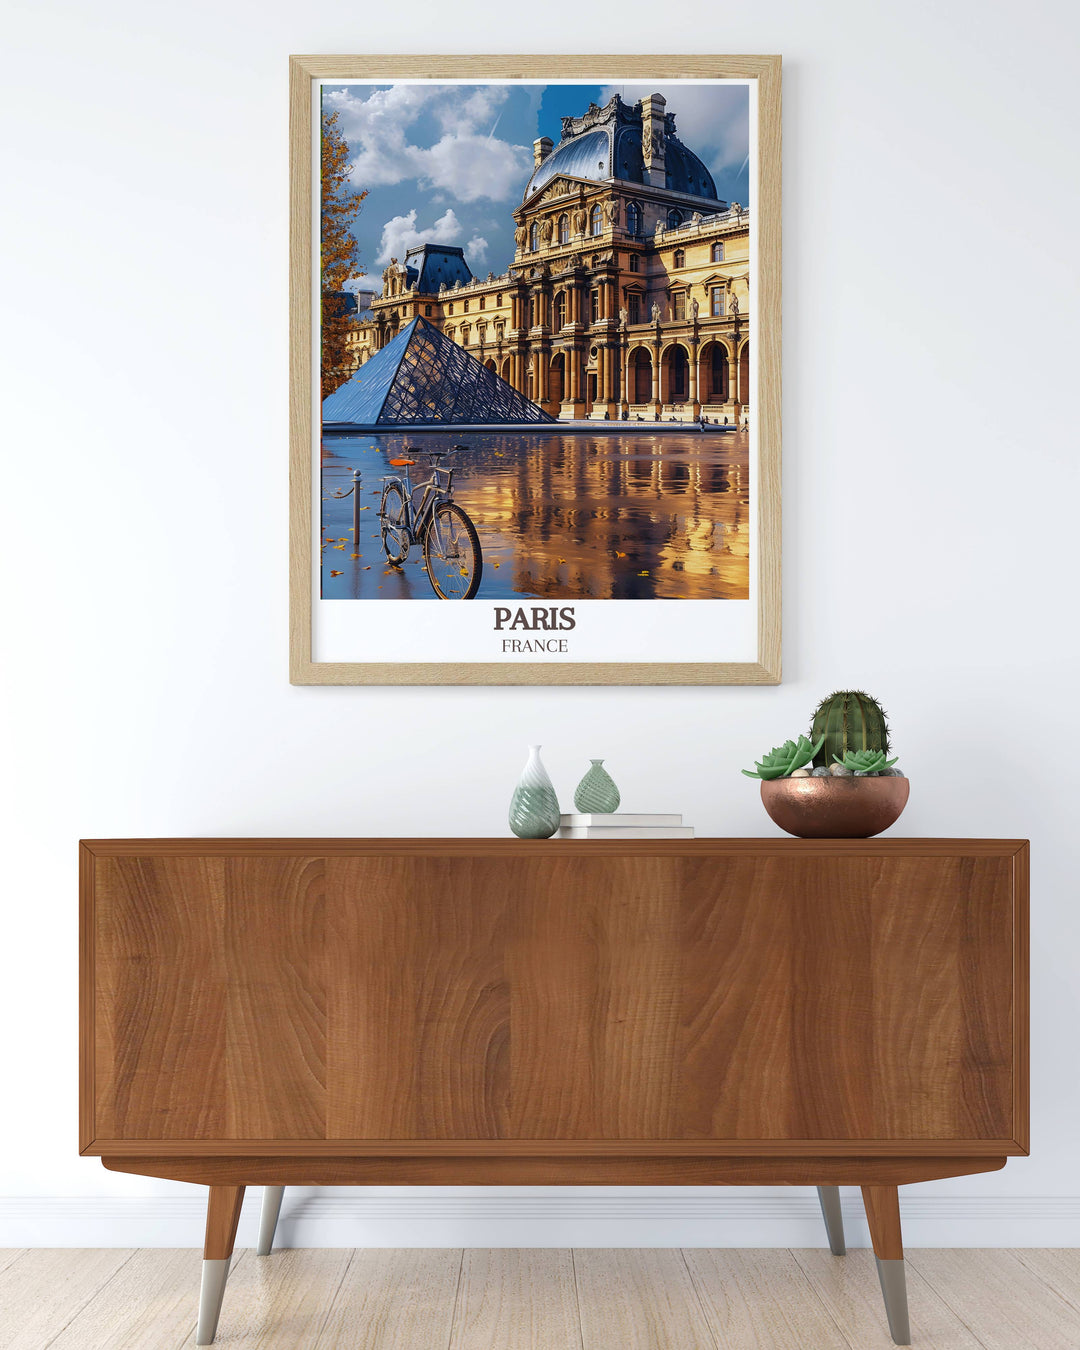 Travel posters of Paris, featuring iconic landmarks such as the Eiffel Tower and Notre Dame Cathedral, perfect for adding a touch of Parisian elegance to your home decor.